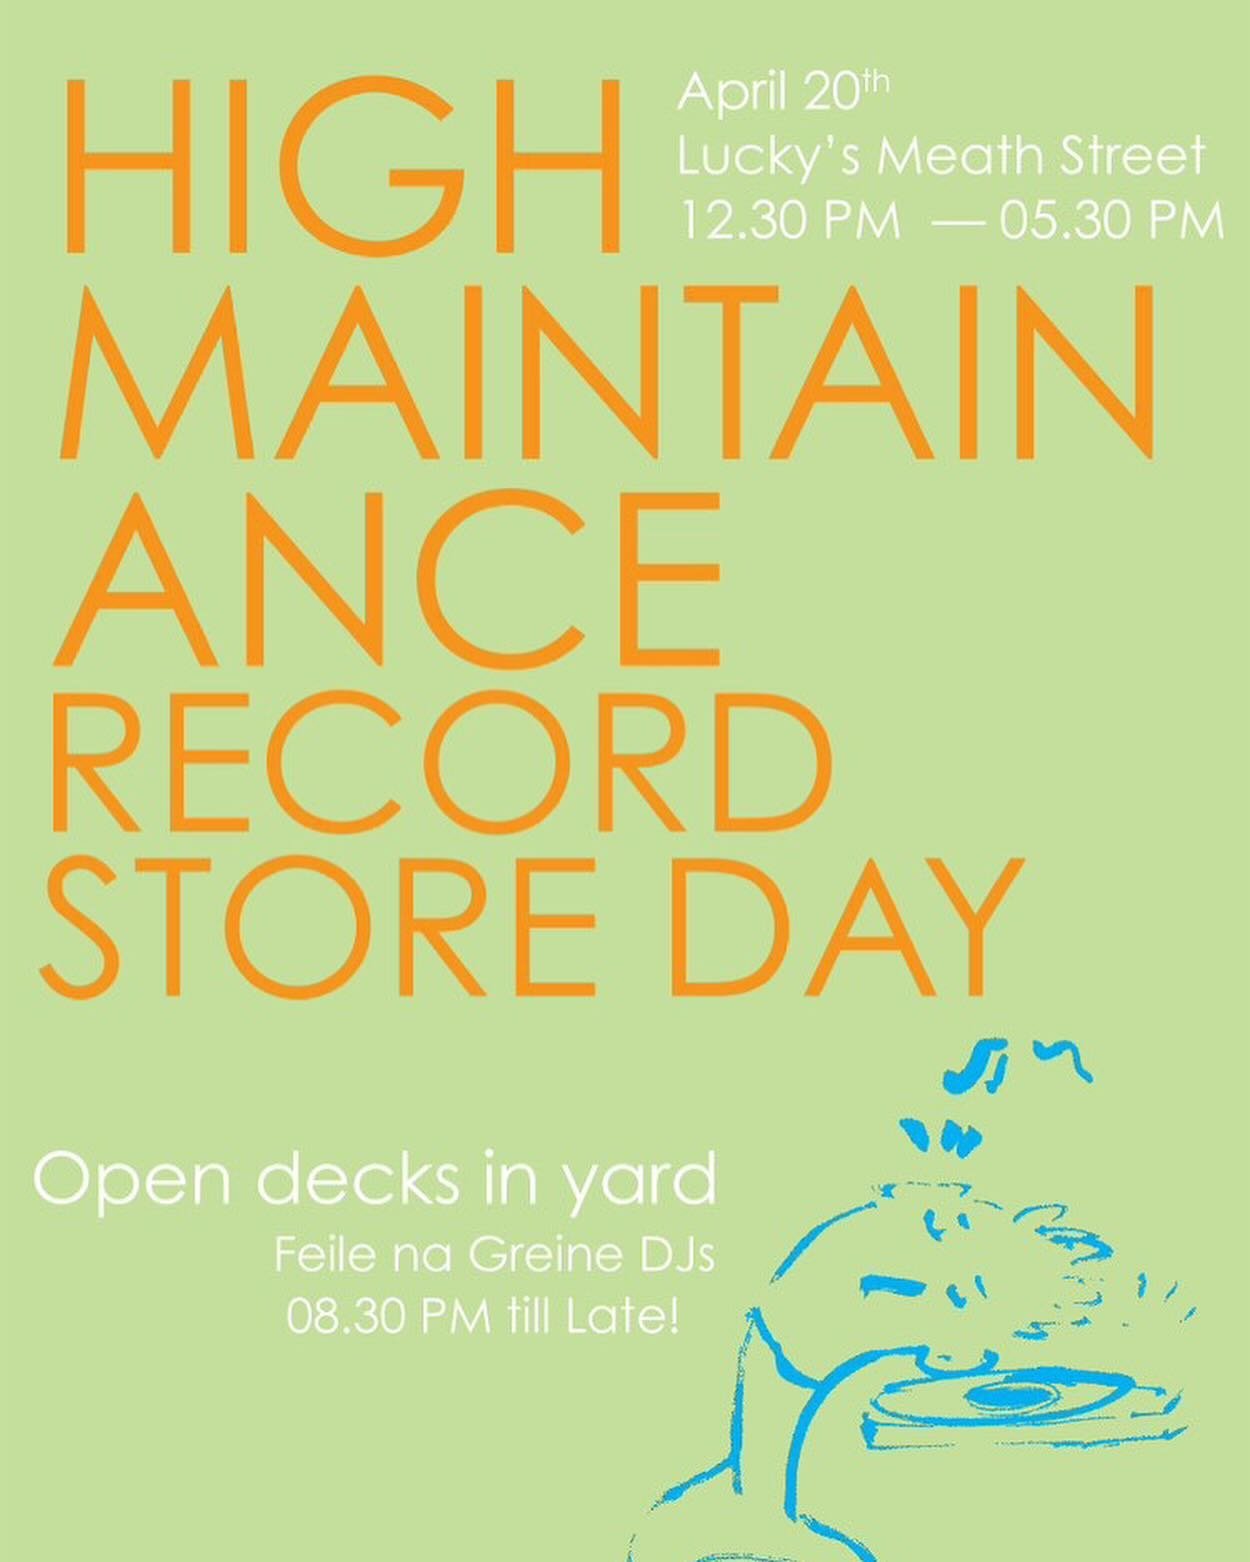 🎧✨🎧 RECORD STORE DAY IS THIS SATURDAY!! 🎧✨🎧

This Saturday 20th come celebrate Record Store Day at Luckys. 

- Market from 12.30pm till 5.30pm 
- Music in the yard from 2.30pm 
- @feilenagreine DJs from 8.30 pm 

Come get merch, records, tapes fr